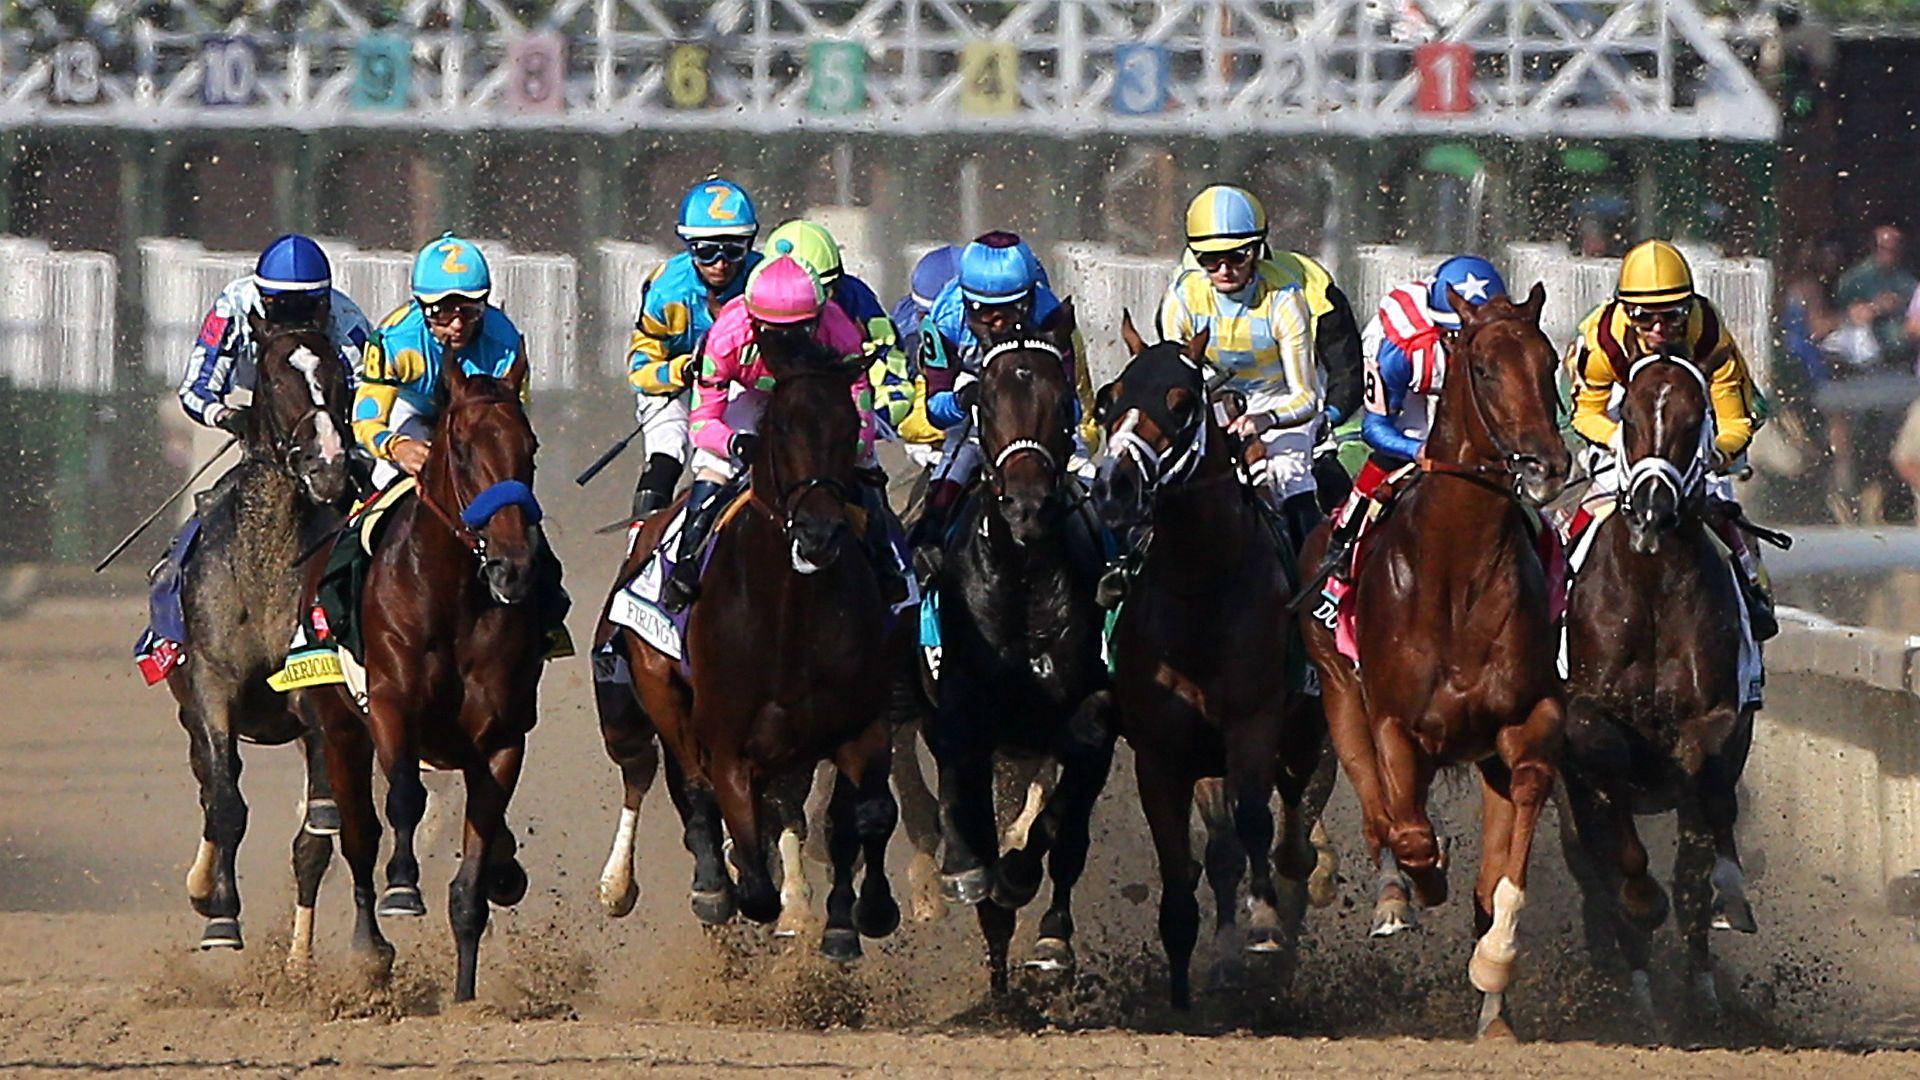 Kentucky Derby 2016: Time, TV channel, online streaming. Other